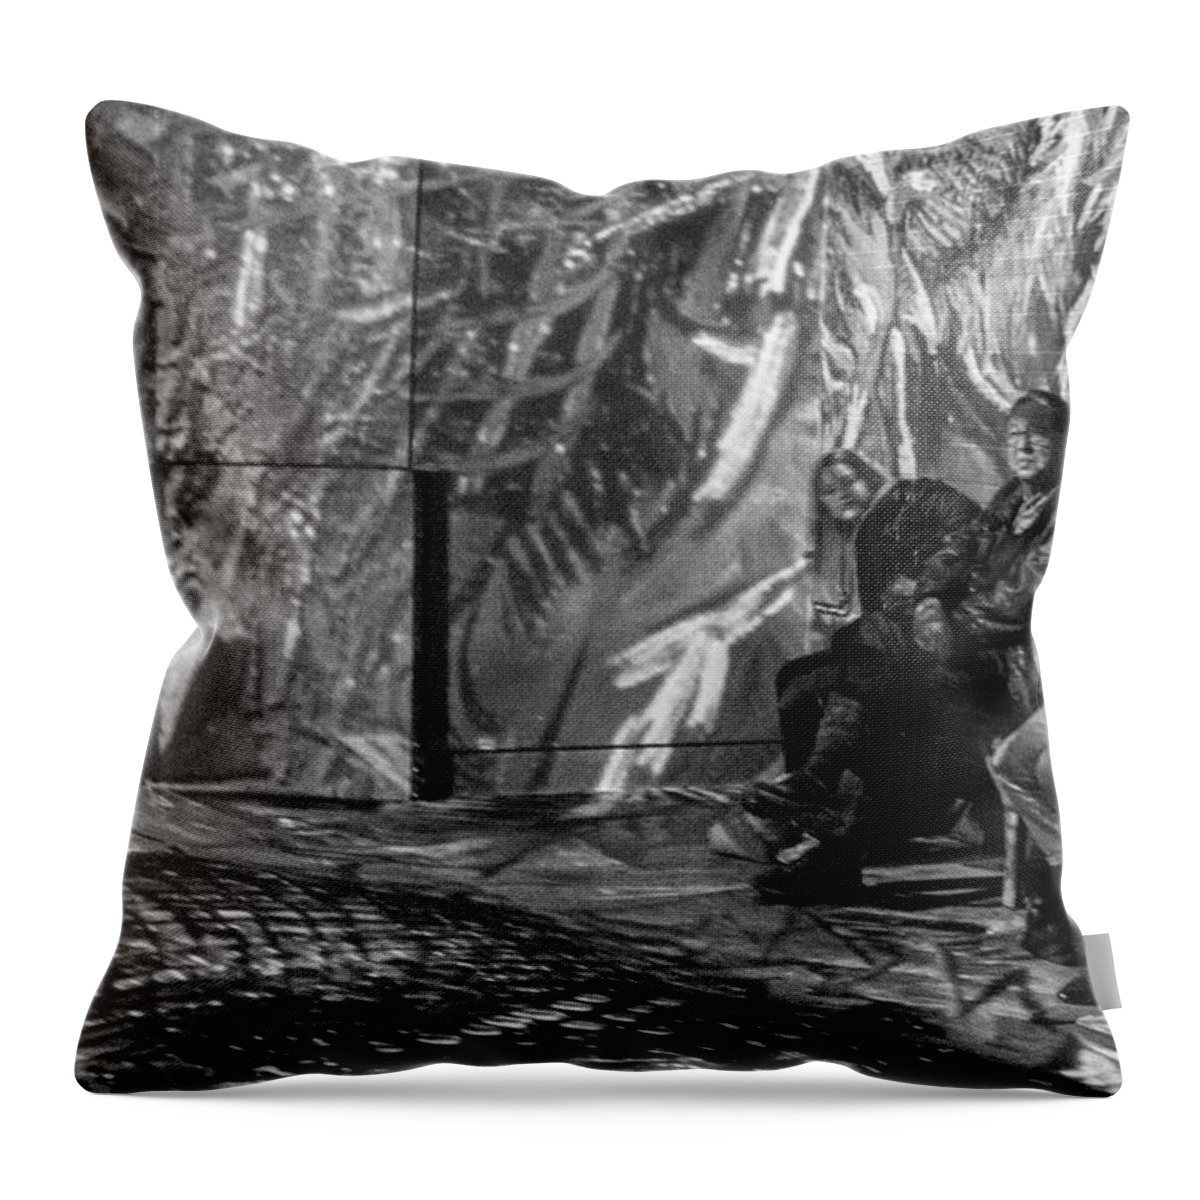 Black And White Throw Pillow featuring the photograph Apolcalypse 402 by Jessica Levant